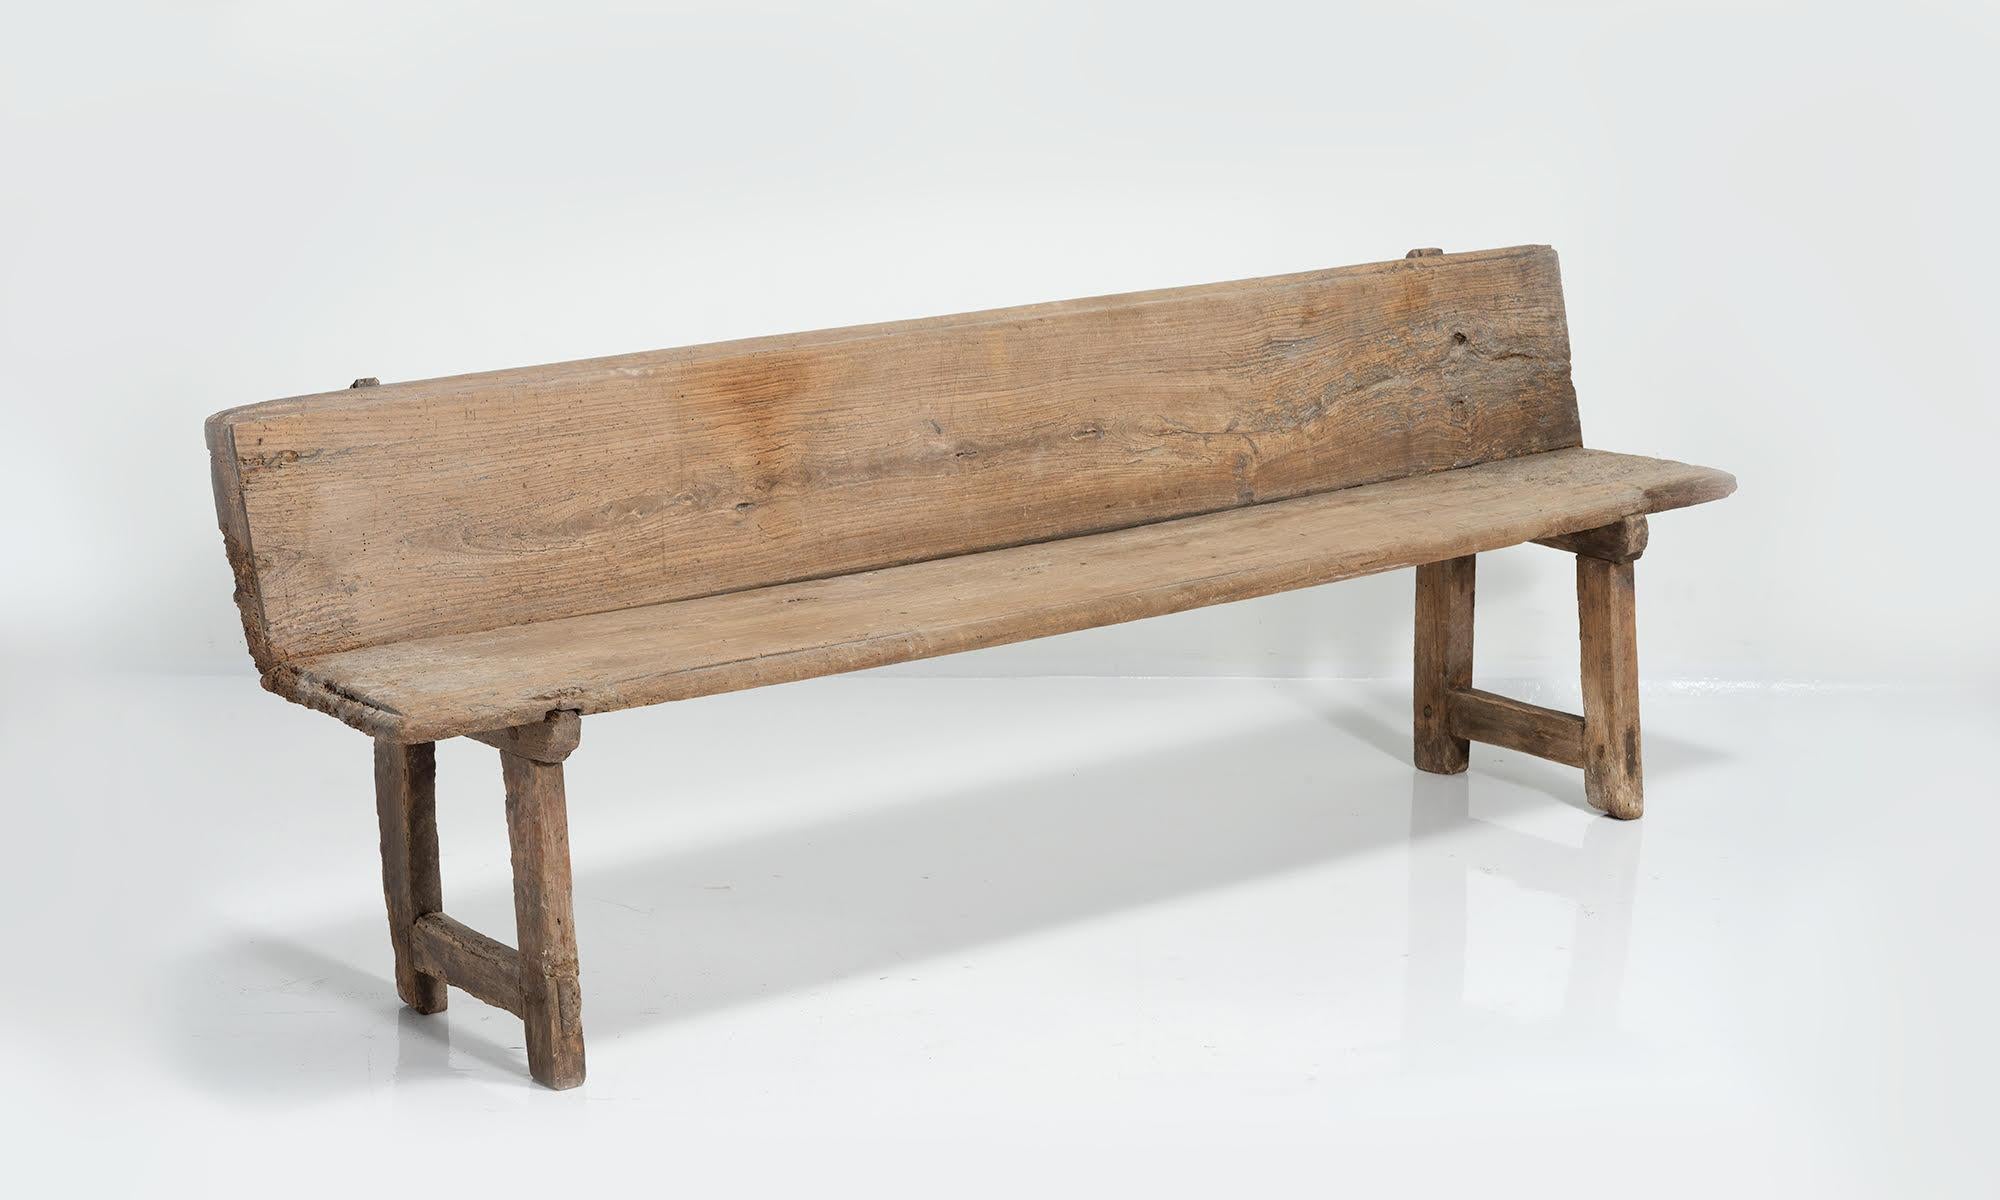 Catalan bench, Spain, 19th century.

Single plank seat and back.